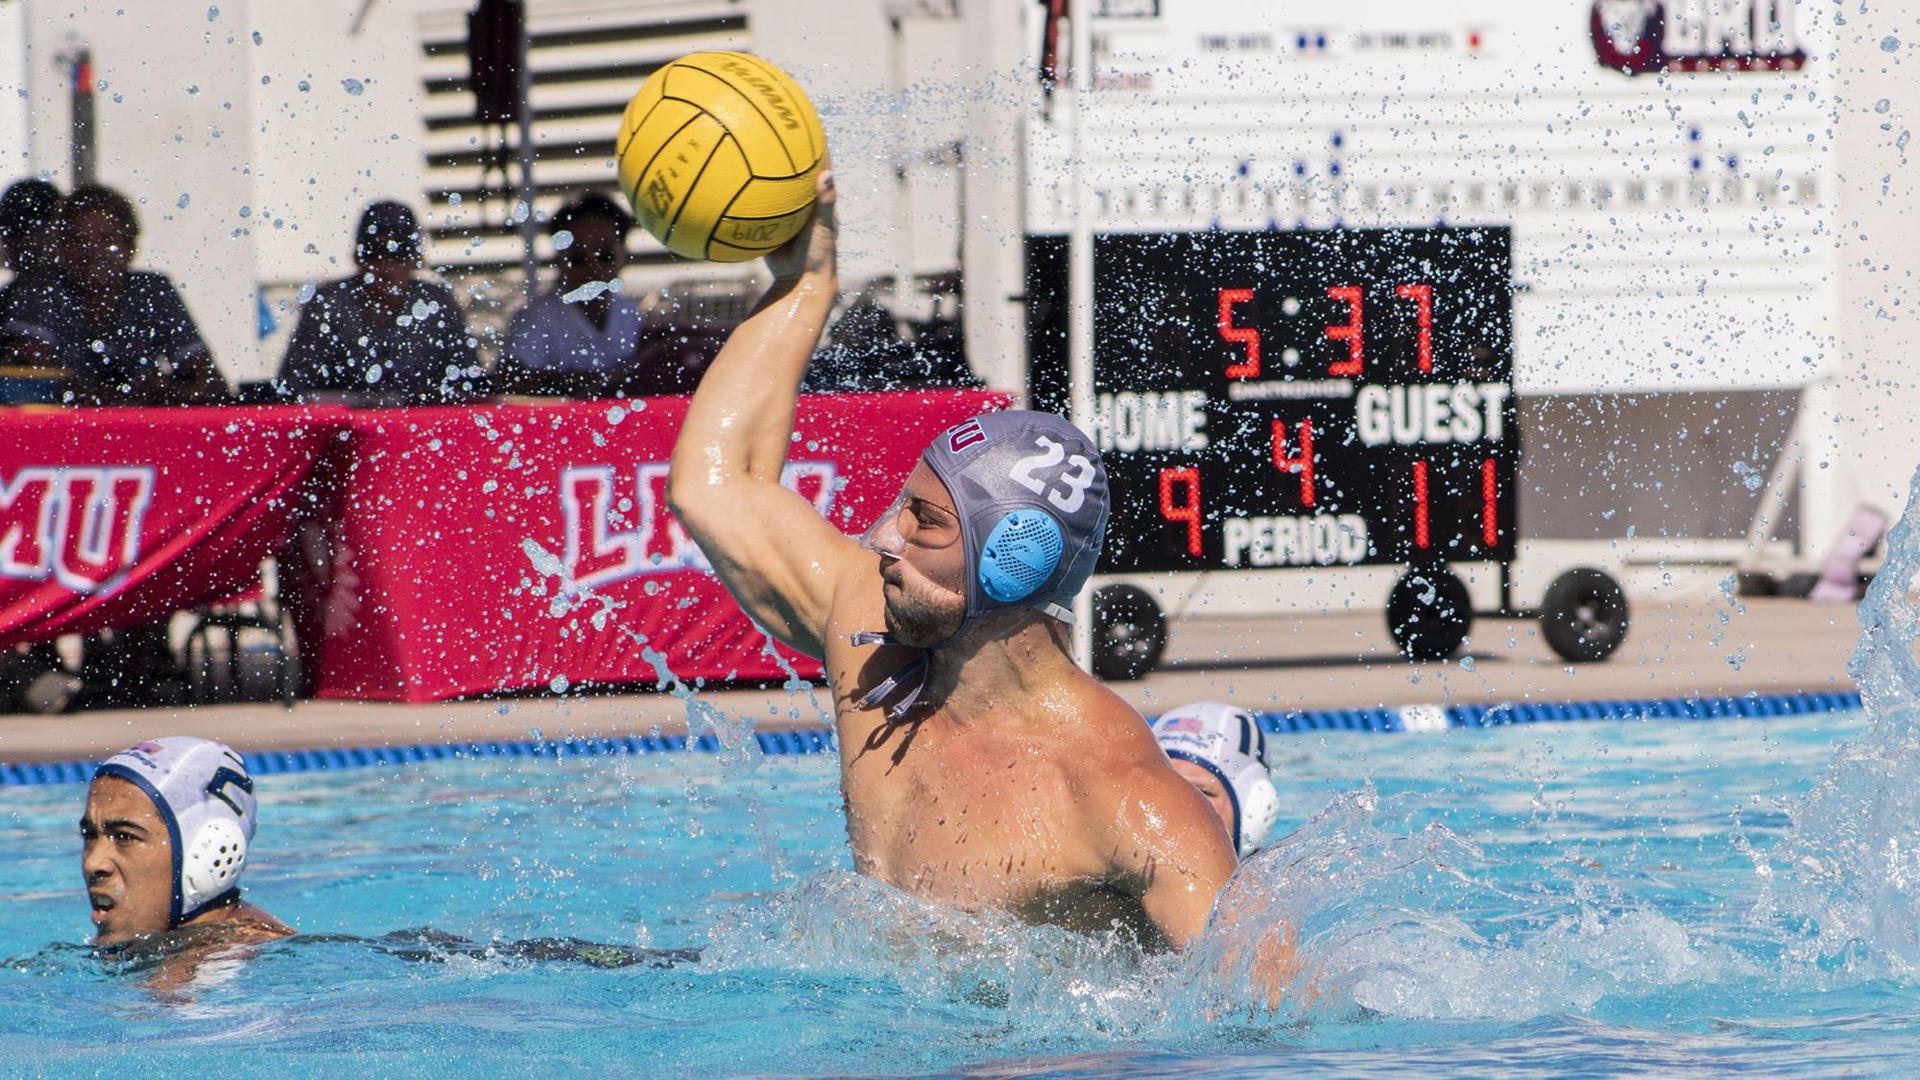 Loyola Marymount’s Mitrovic Nabs WWPA Player of the Year Honors